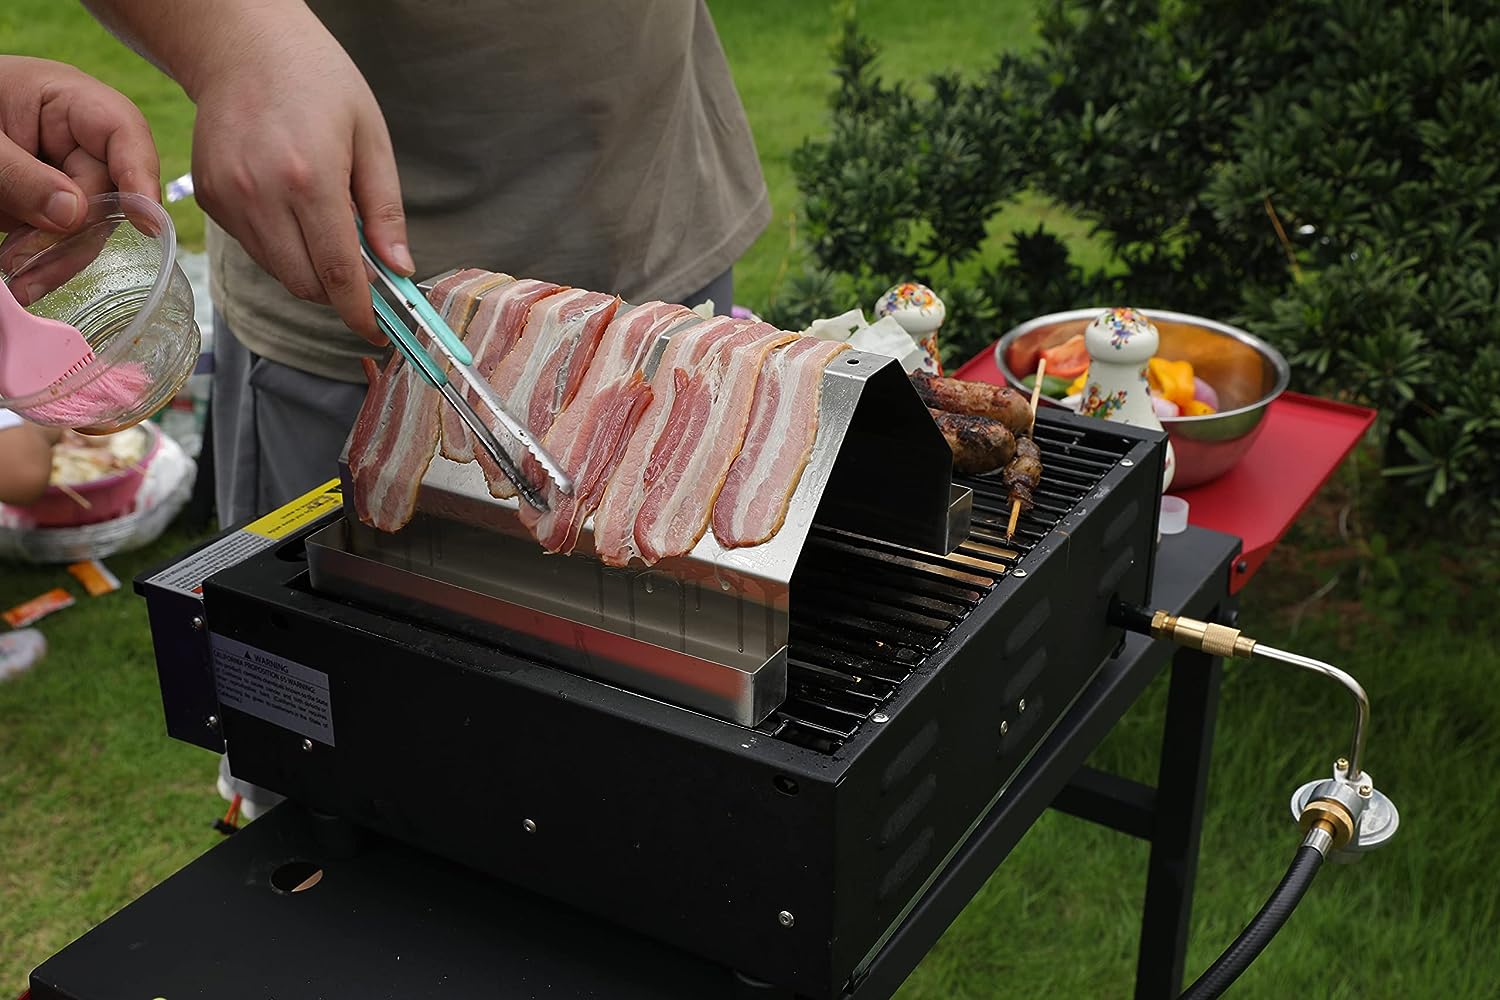 Bacon Grilling Rack